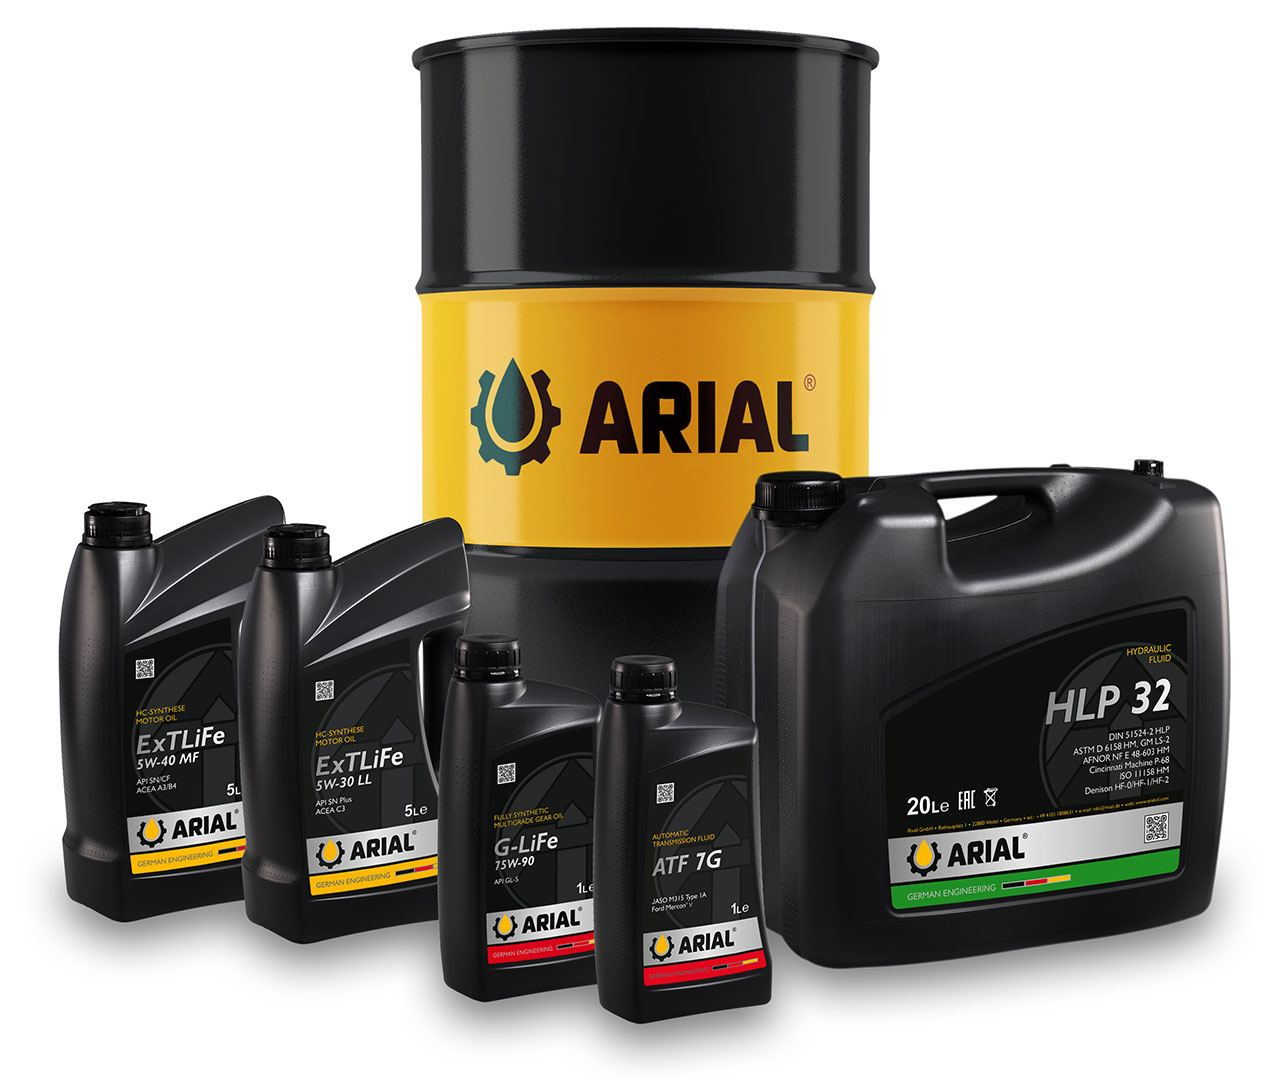 ARIAL OIL PRODUCTS ABOUT US 2